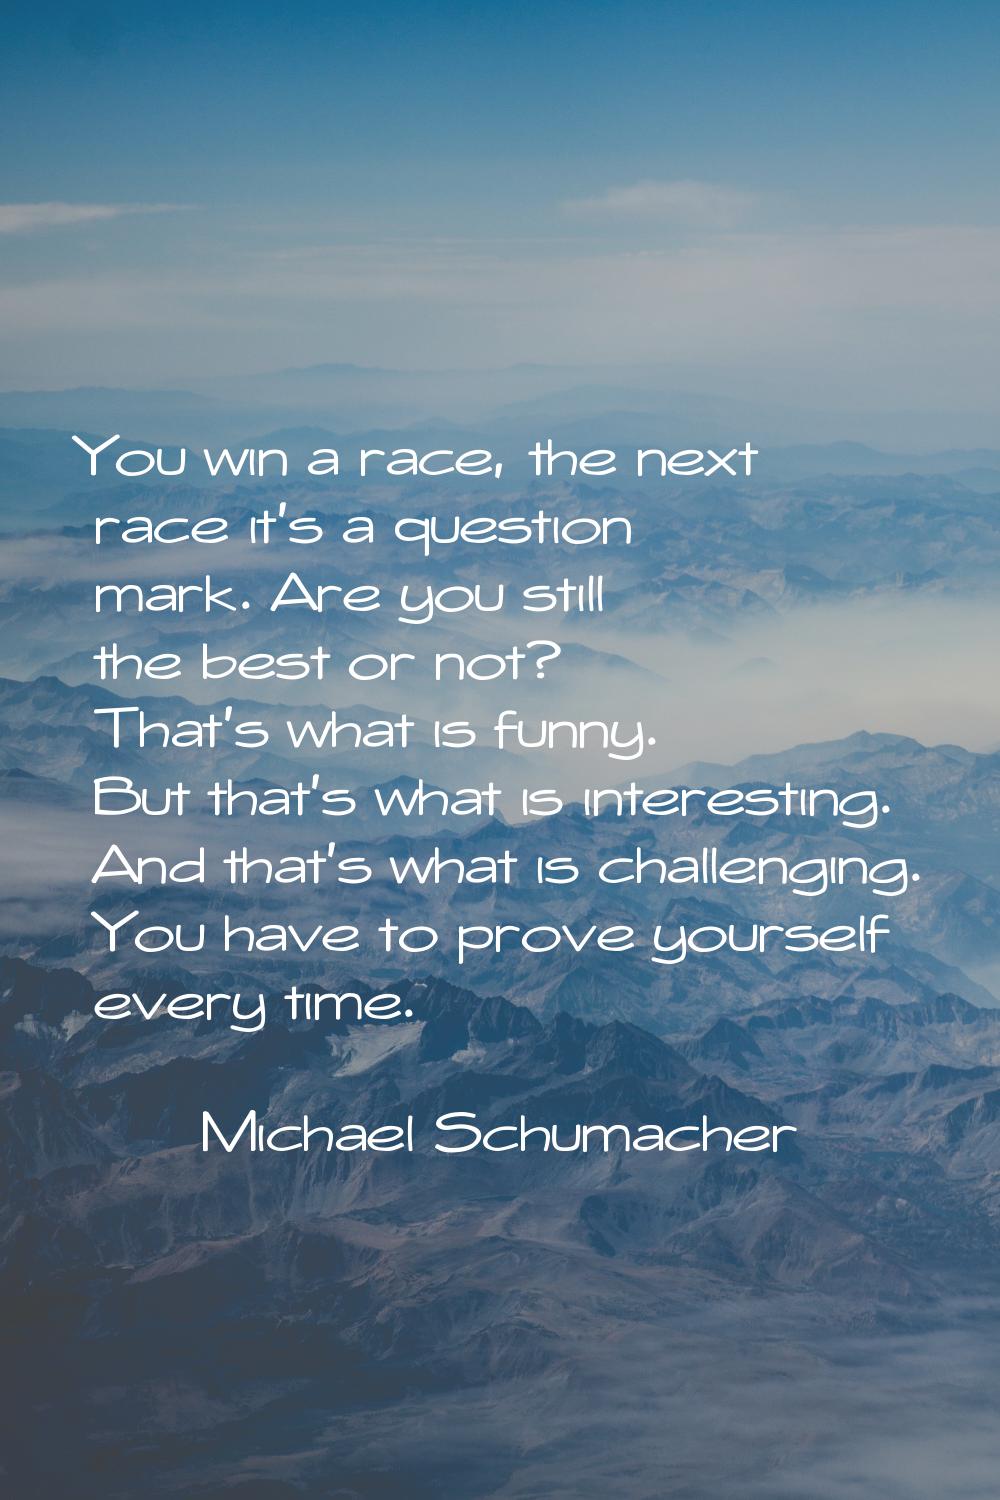 You win a race, the next race it's a question mark. Are you still the best or not? That's what is f